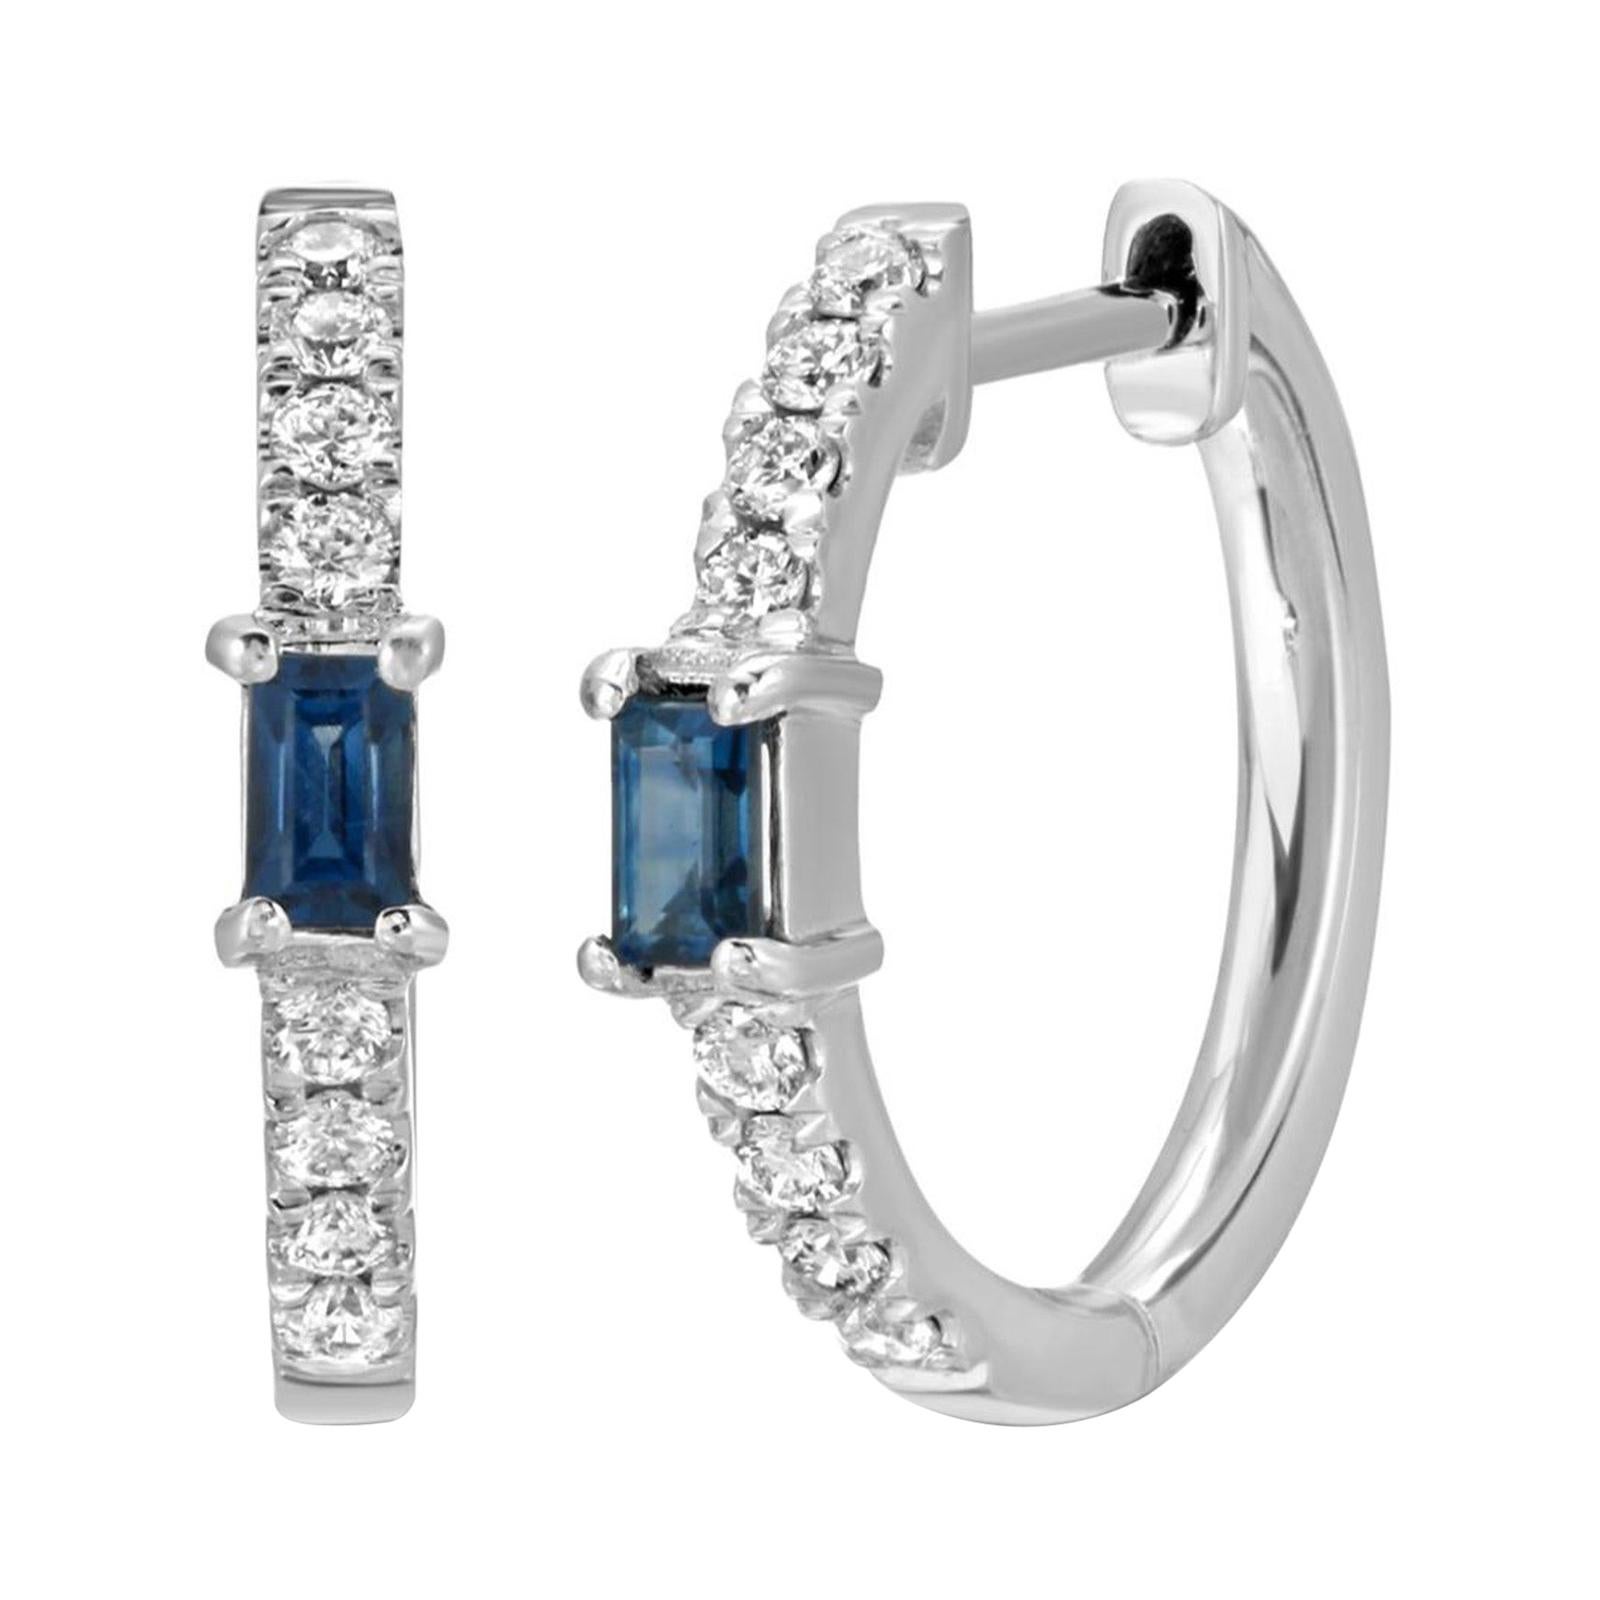 0.47 CT Natural Blue Sapphire & 0.17 CT Diamonds in 14K White Gold Hoop Earrings For Sale